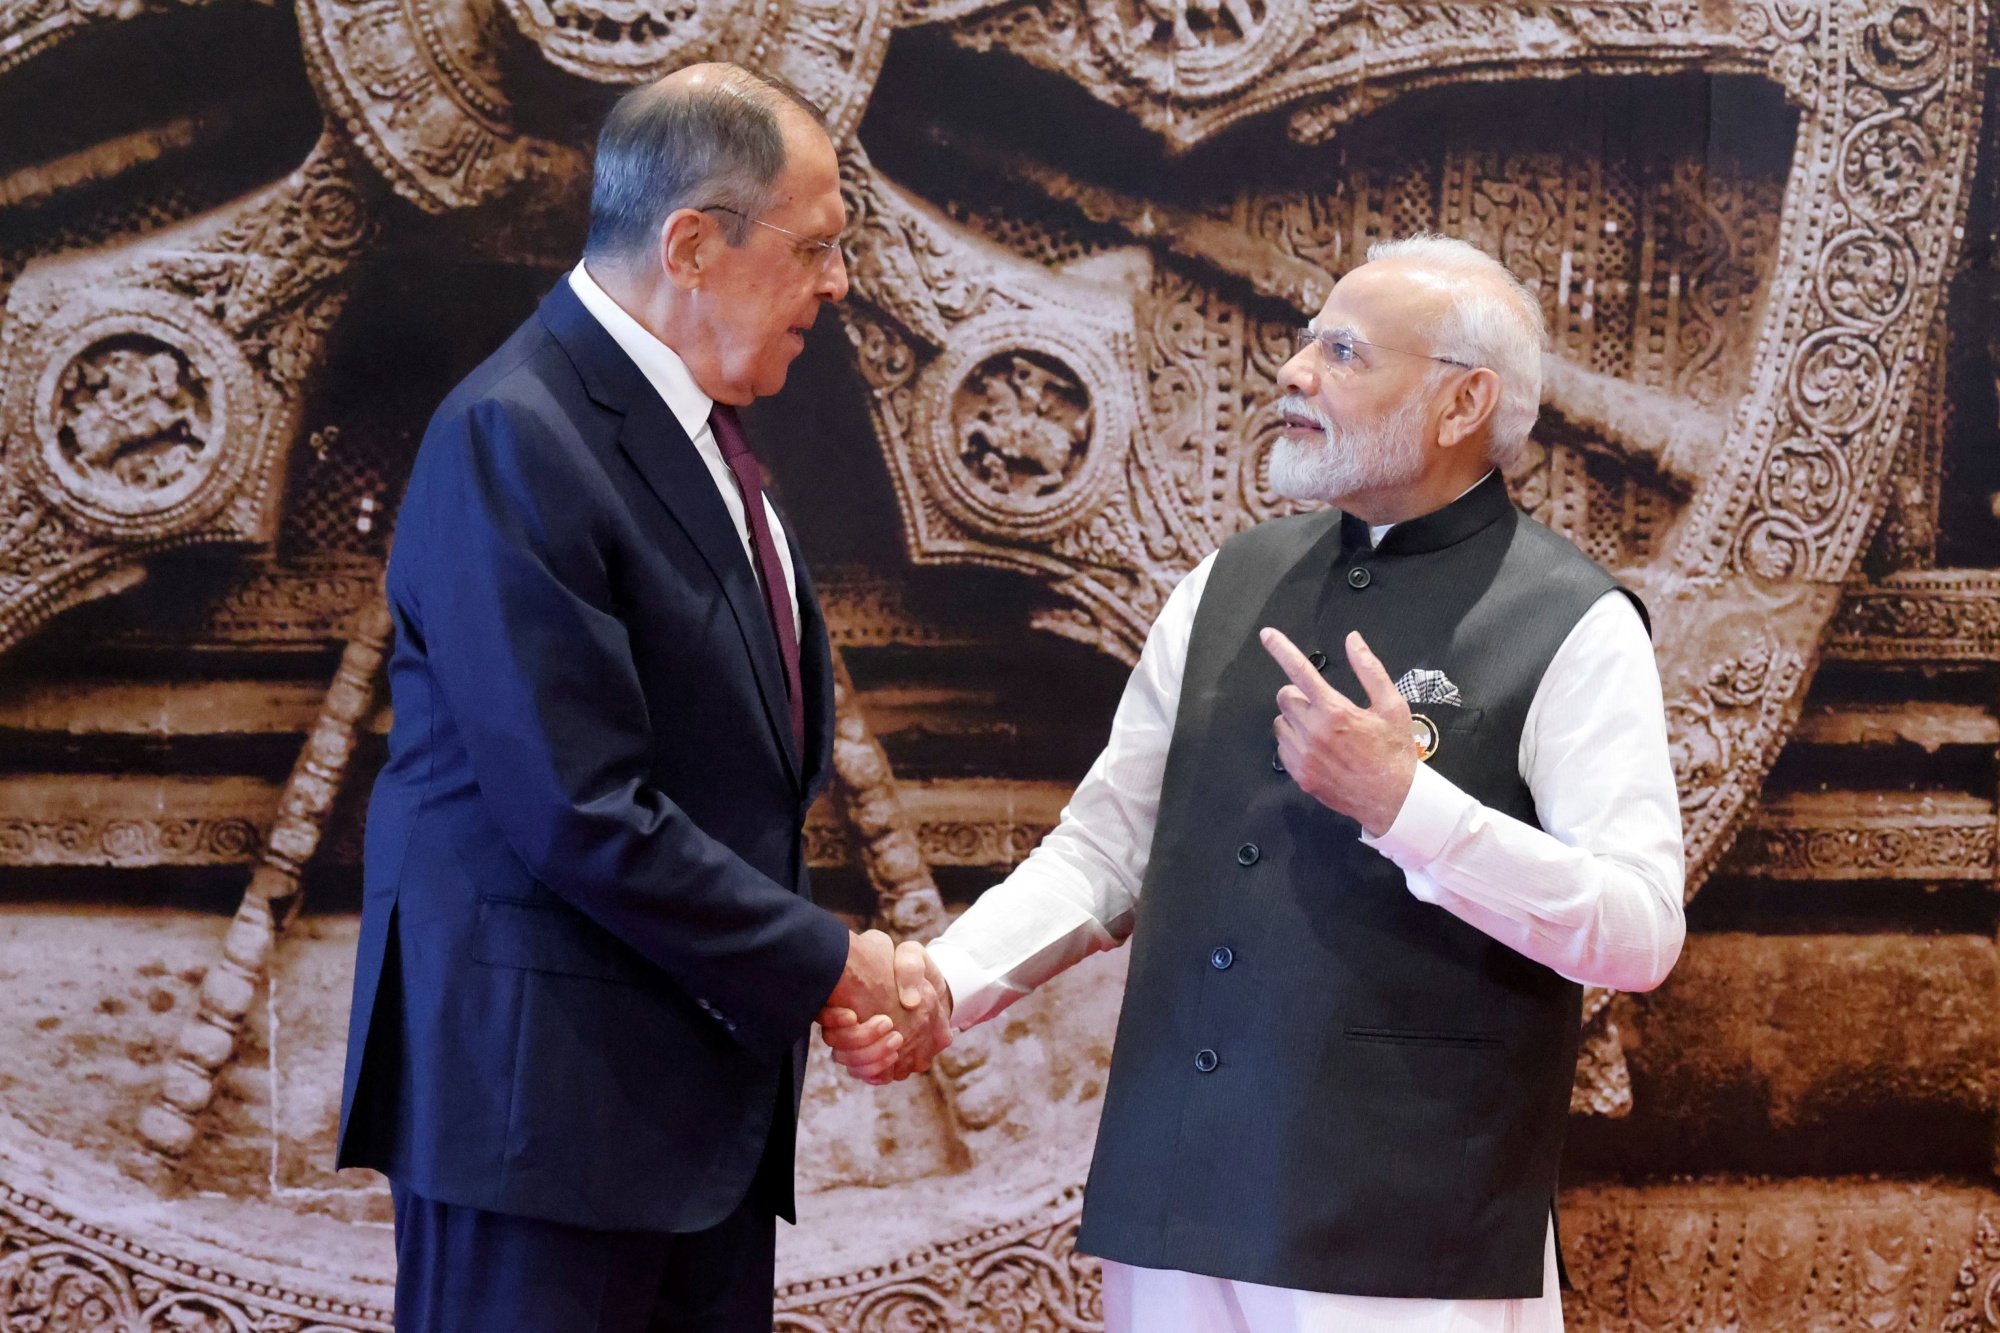 India To Offer Russia to Invest Trapped Rupees, Lavrov Says - Bloomberg